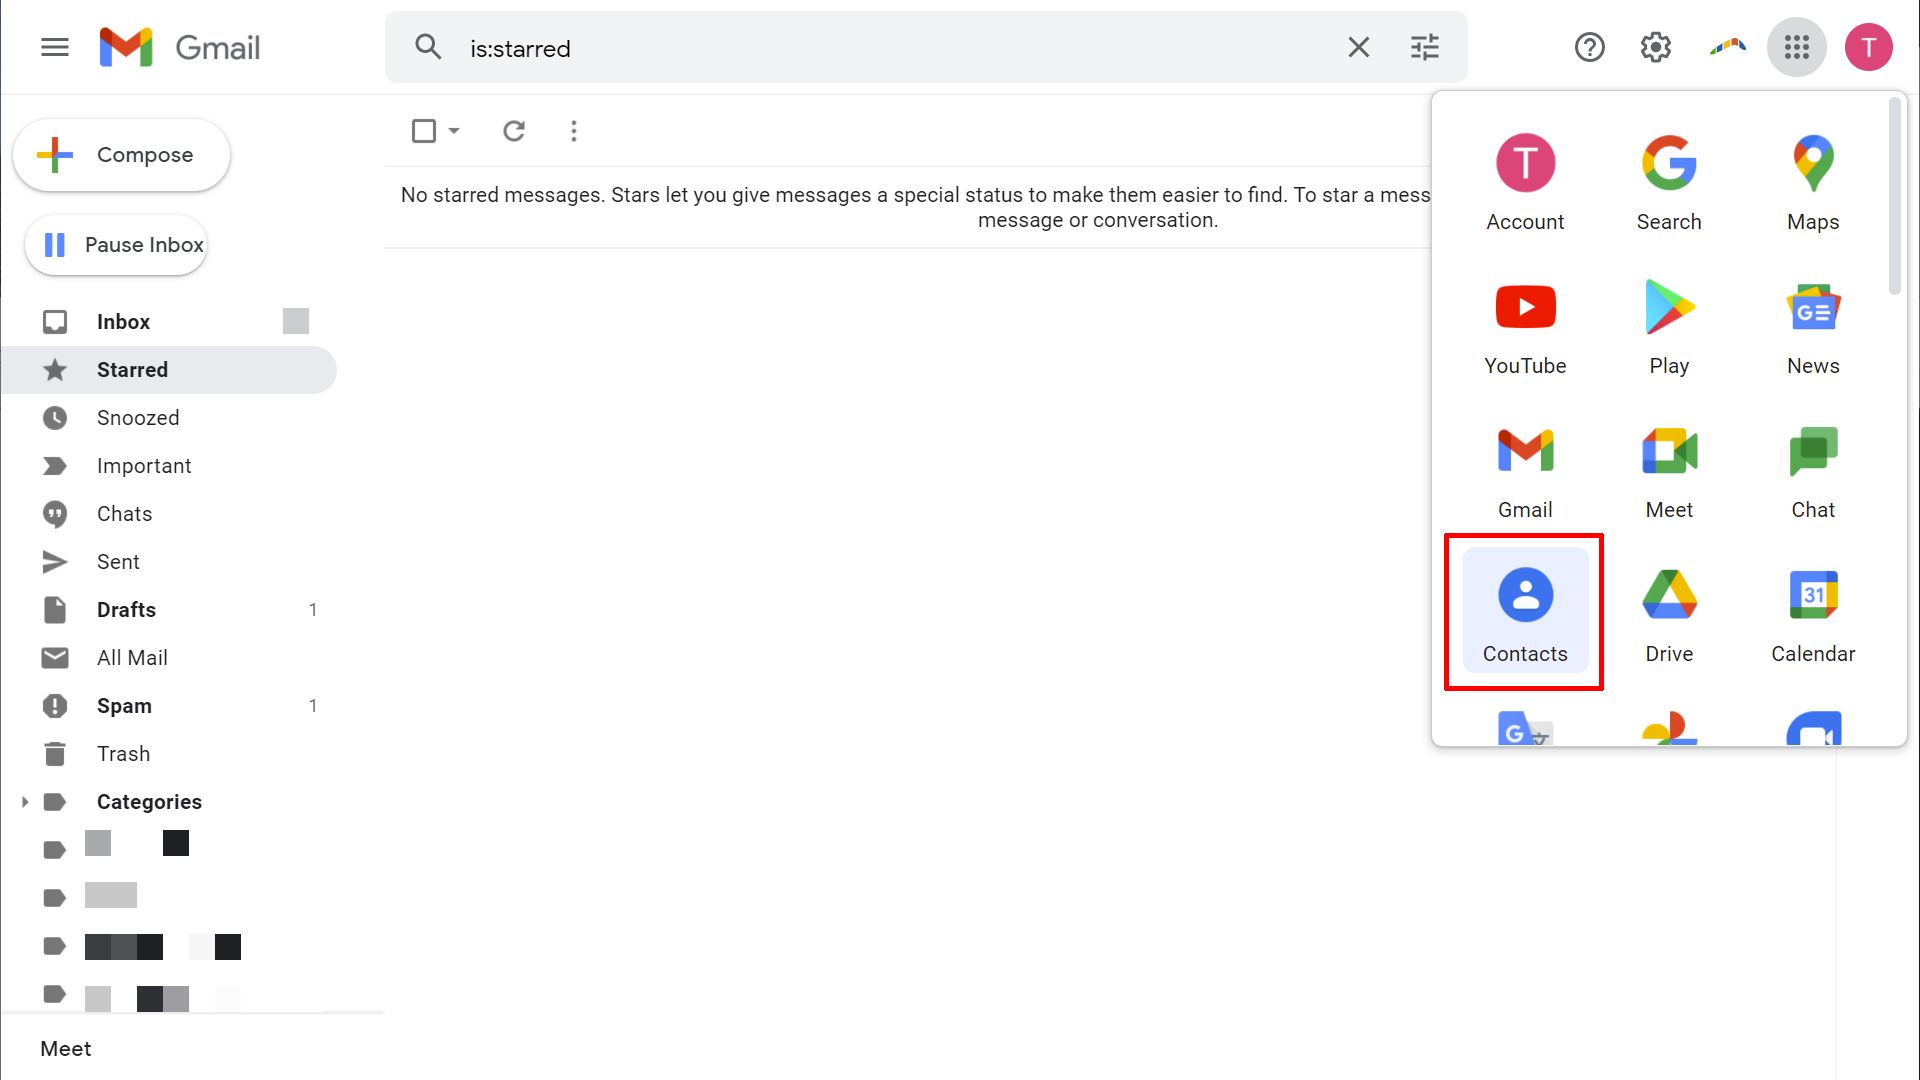 Gmail webmail interface with google apps menu expanded.